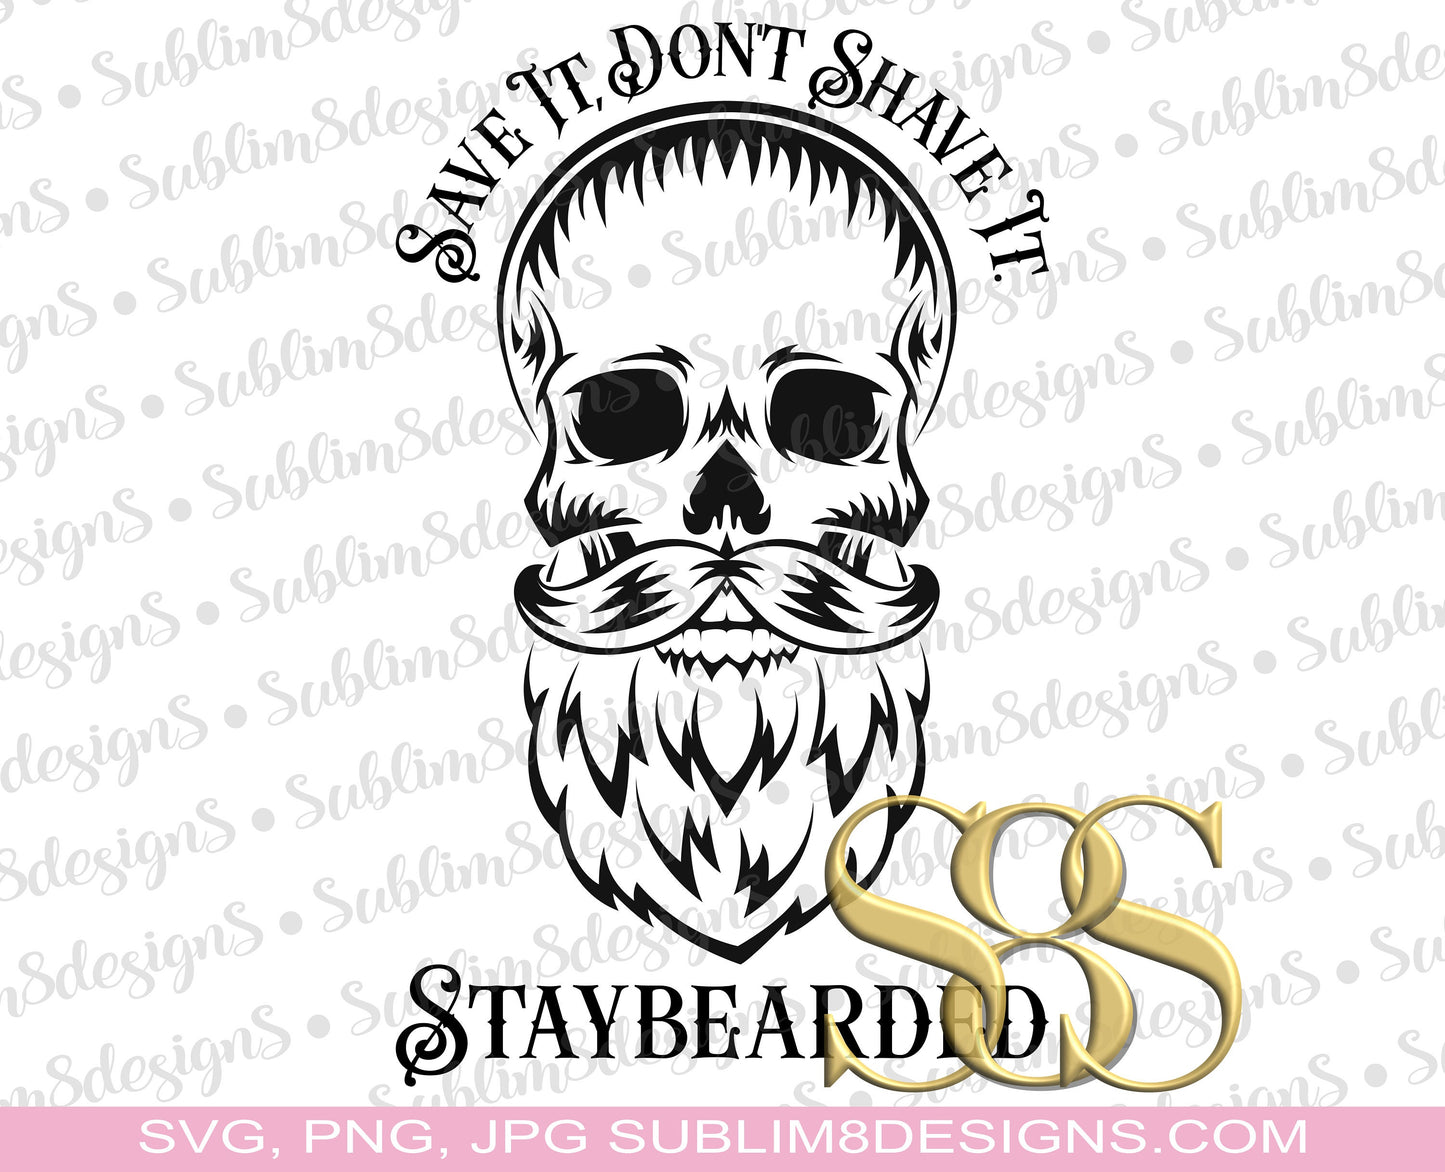 Save It, Don't Shave It. Staybearded PNG and JPG ONLY